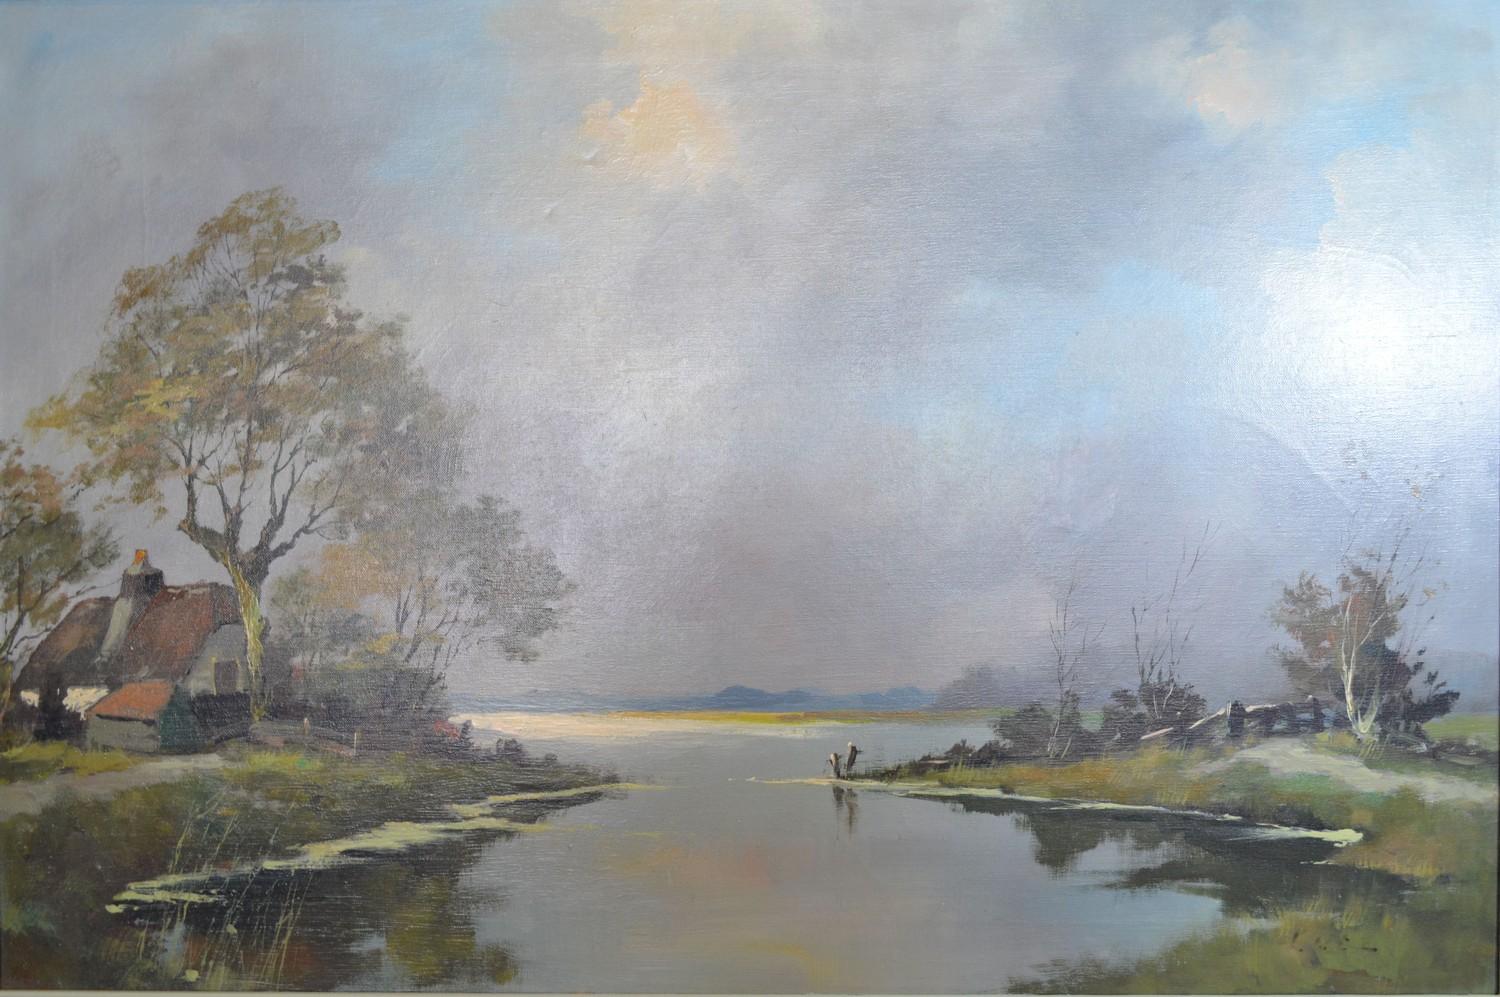 Lutz, Lake Scene with House in the Foreground, oil on canvas, 60 x 90cm